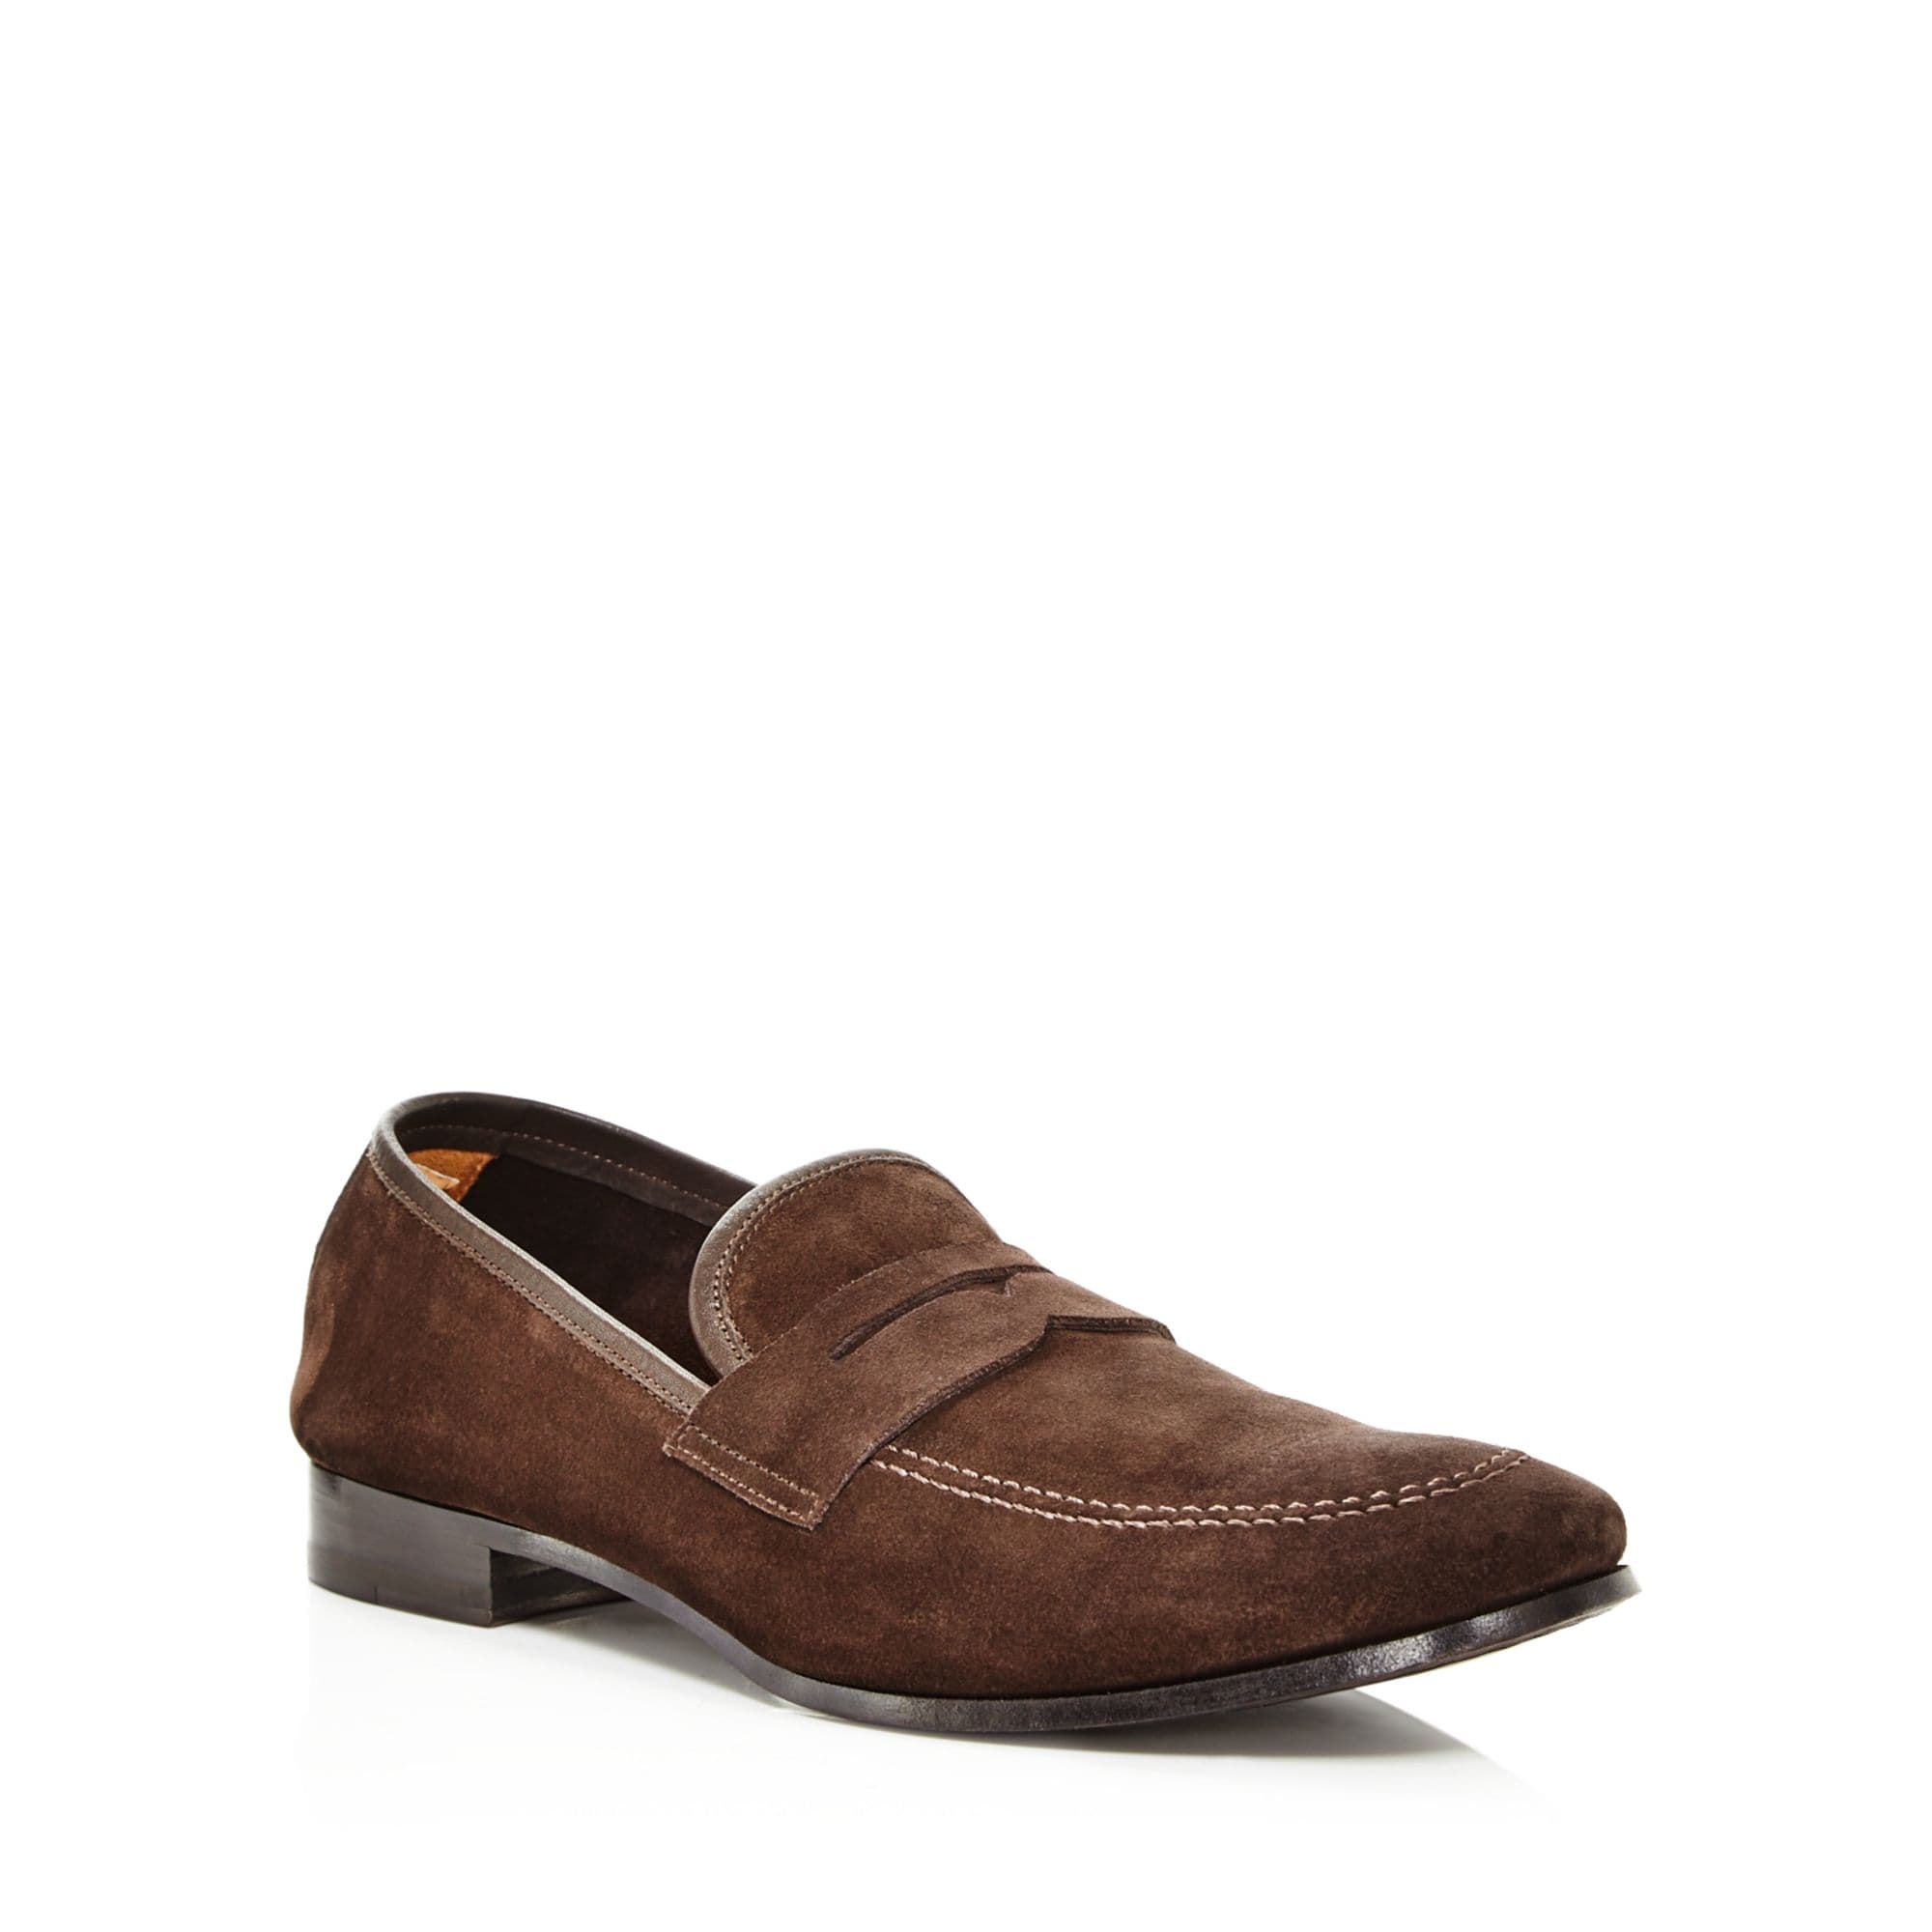 woocommerce-673321-2209615.cloudwaysapps.com-the-mens-store-mens-brown-suede-apron-toe-penny-loafers